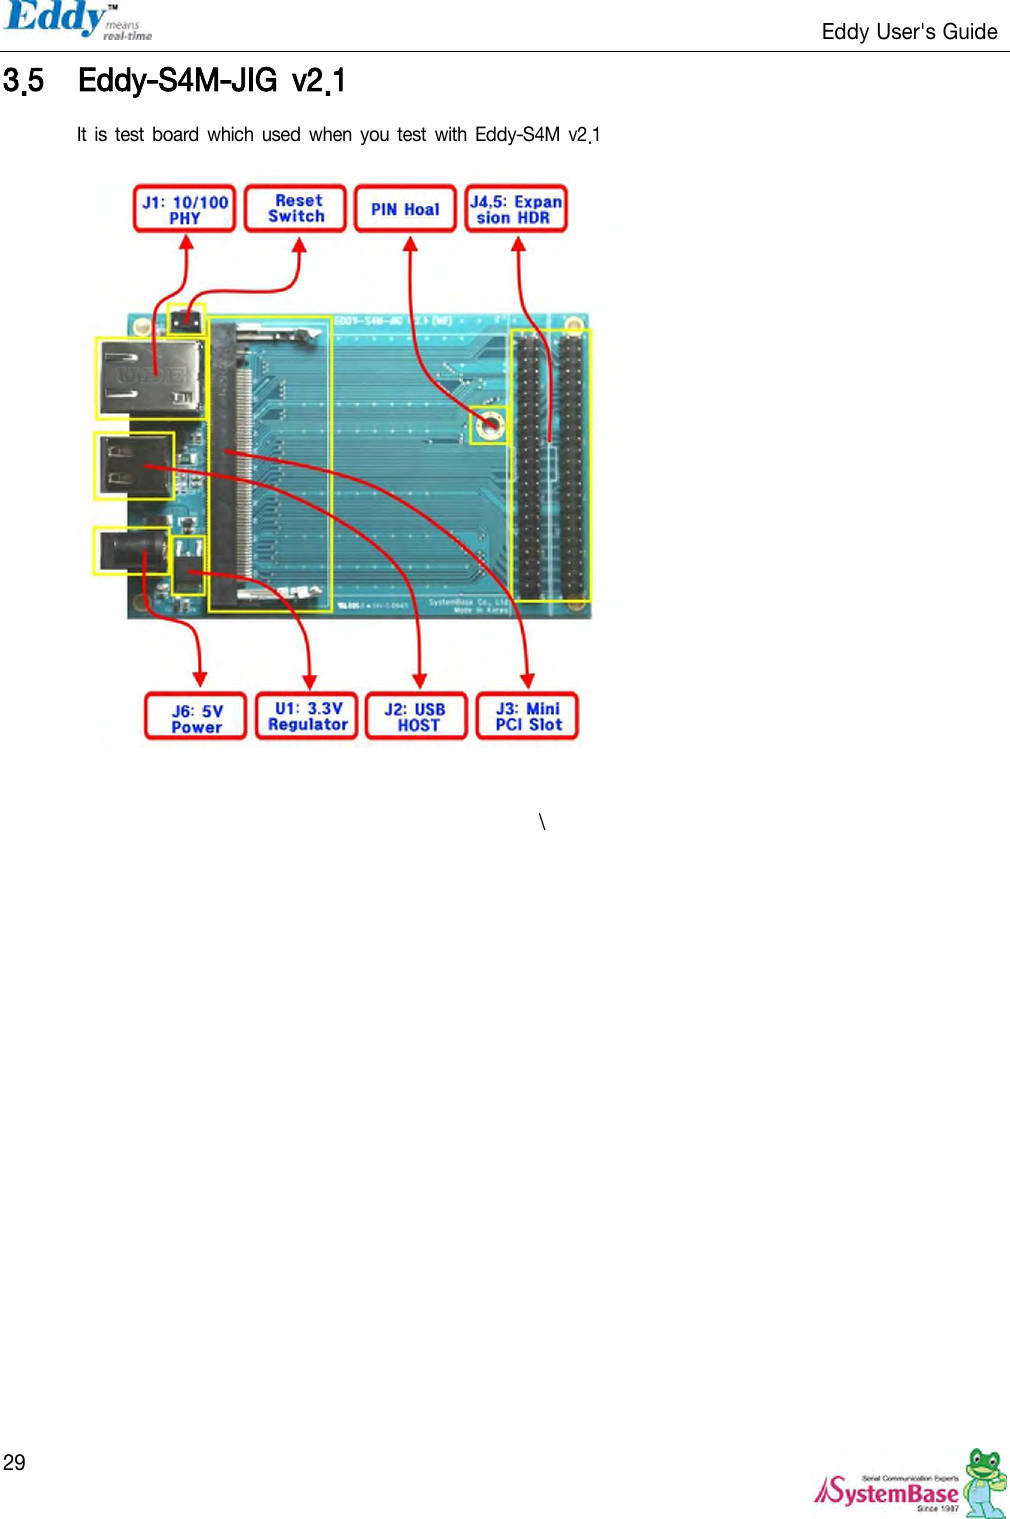                                                                   Eddy User&apos;s Guide   29 3.5 Eddy-S4M-JIG  v2.1   It is test board which used  when you test with  Eddy-S4M  v2.1                          \                    